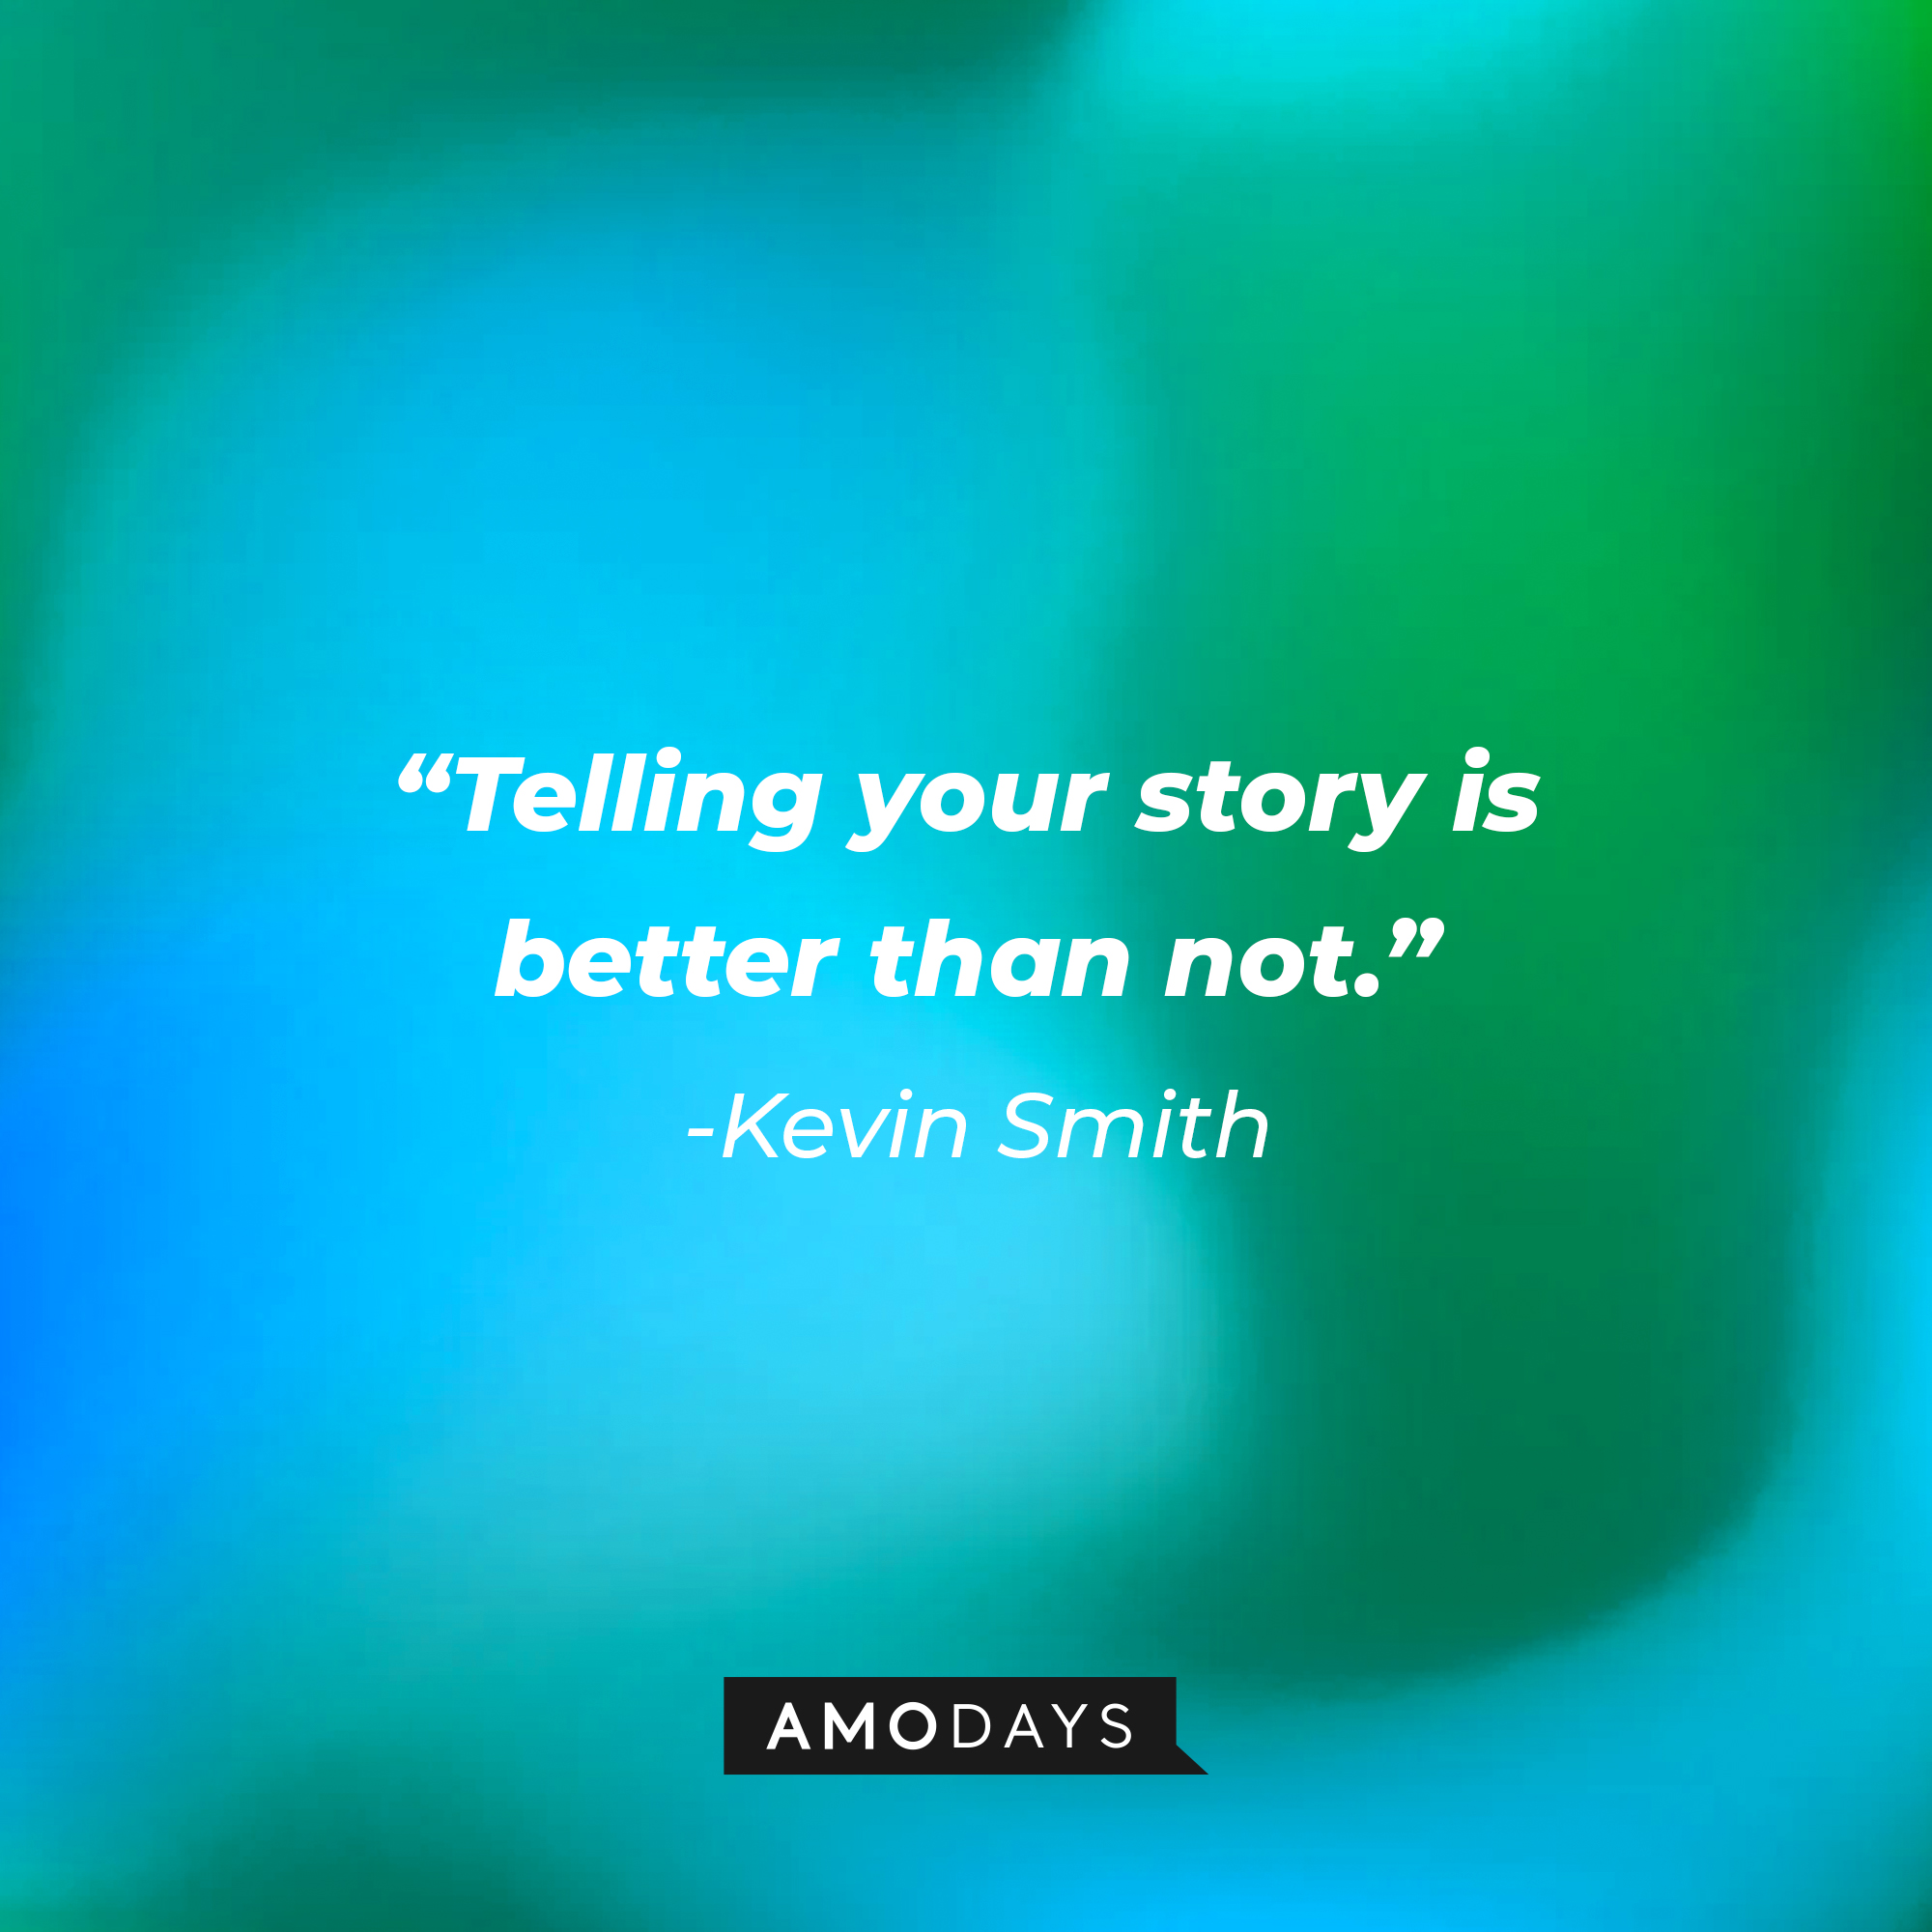 Kevin Smith’s quote: “Telling your story is better than not." | Source: AmoDays